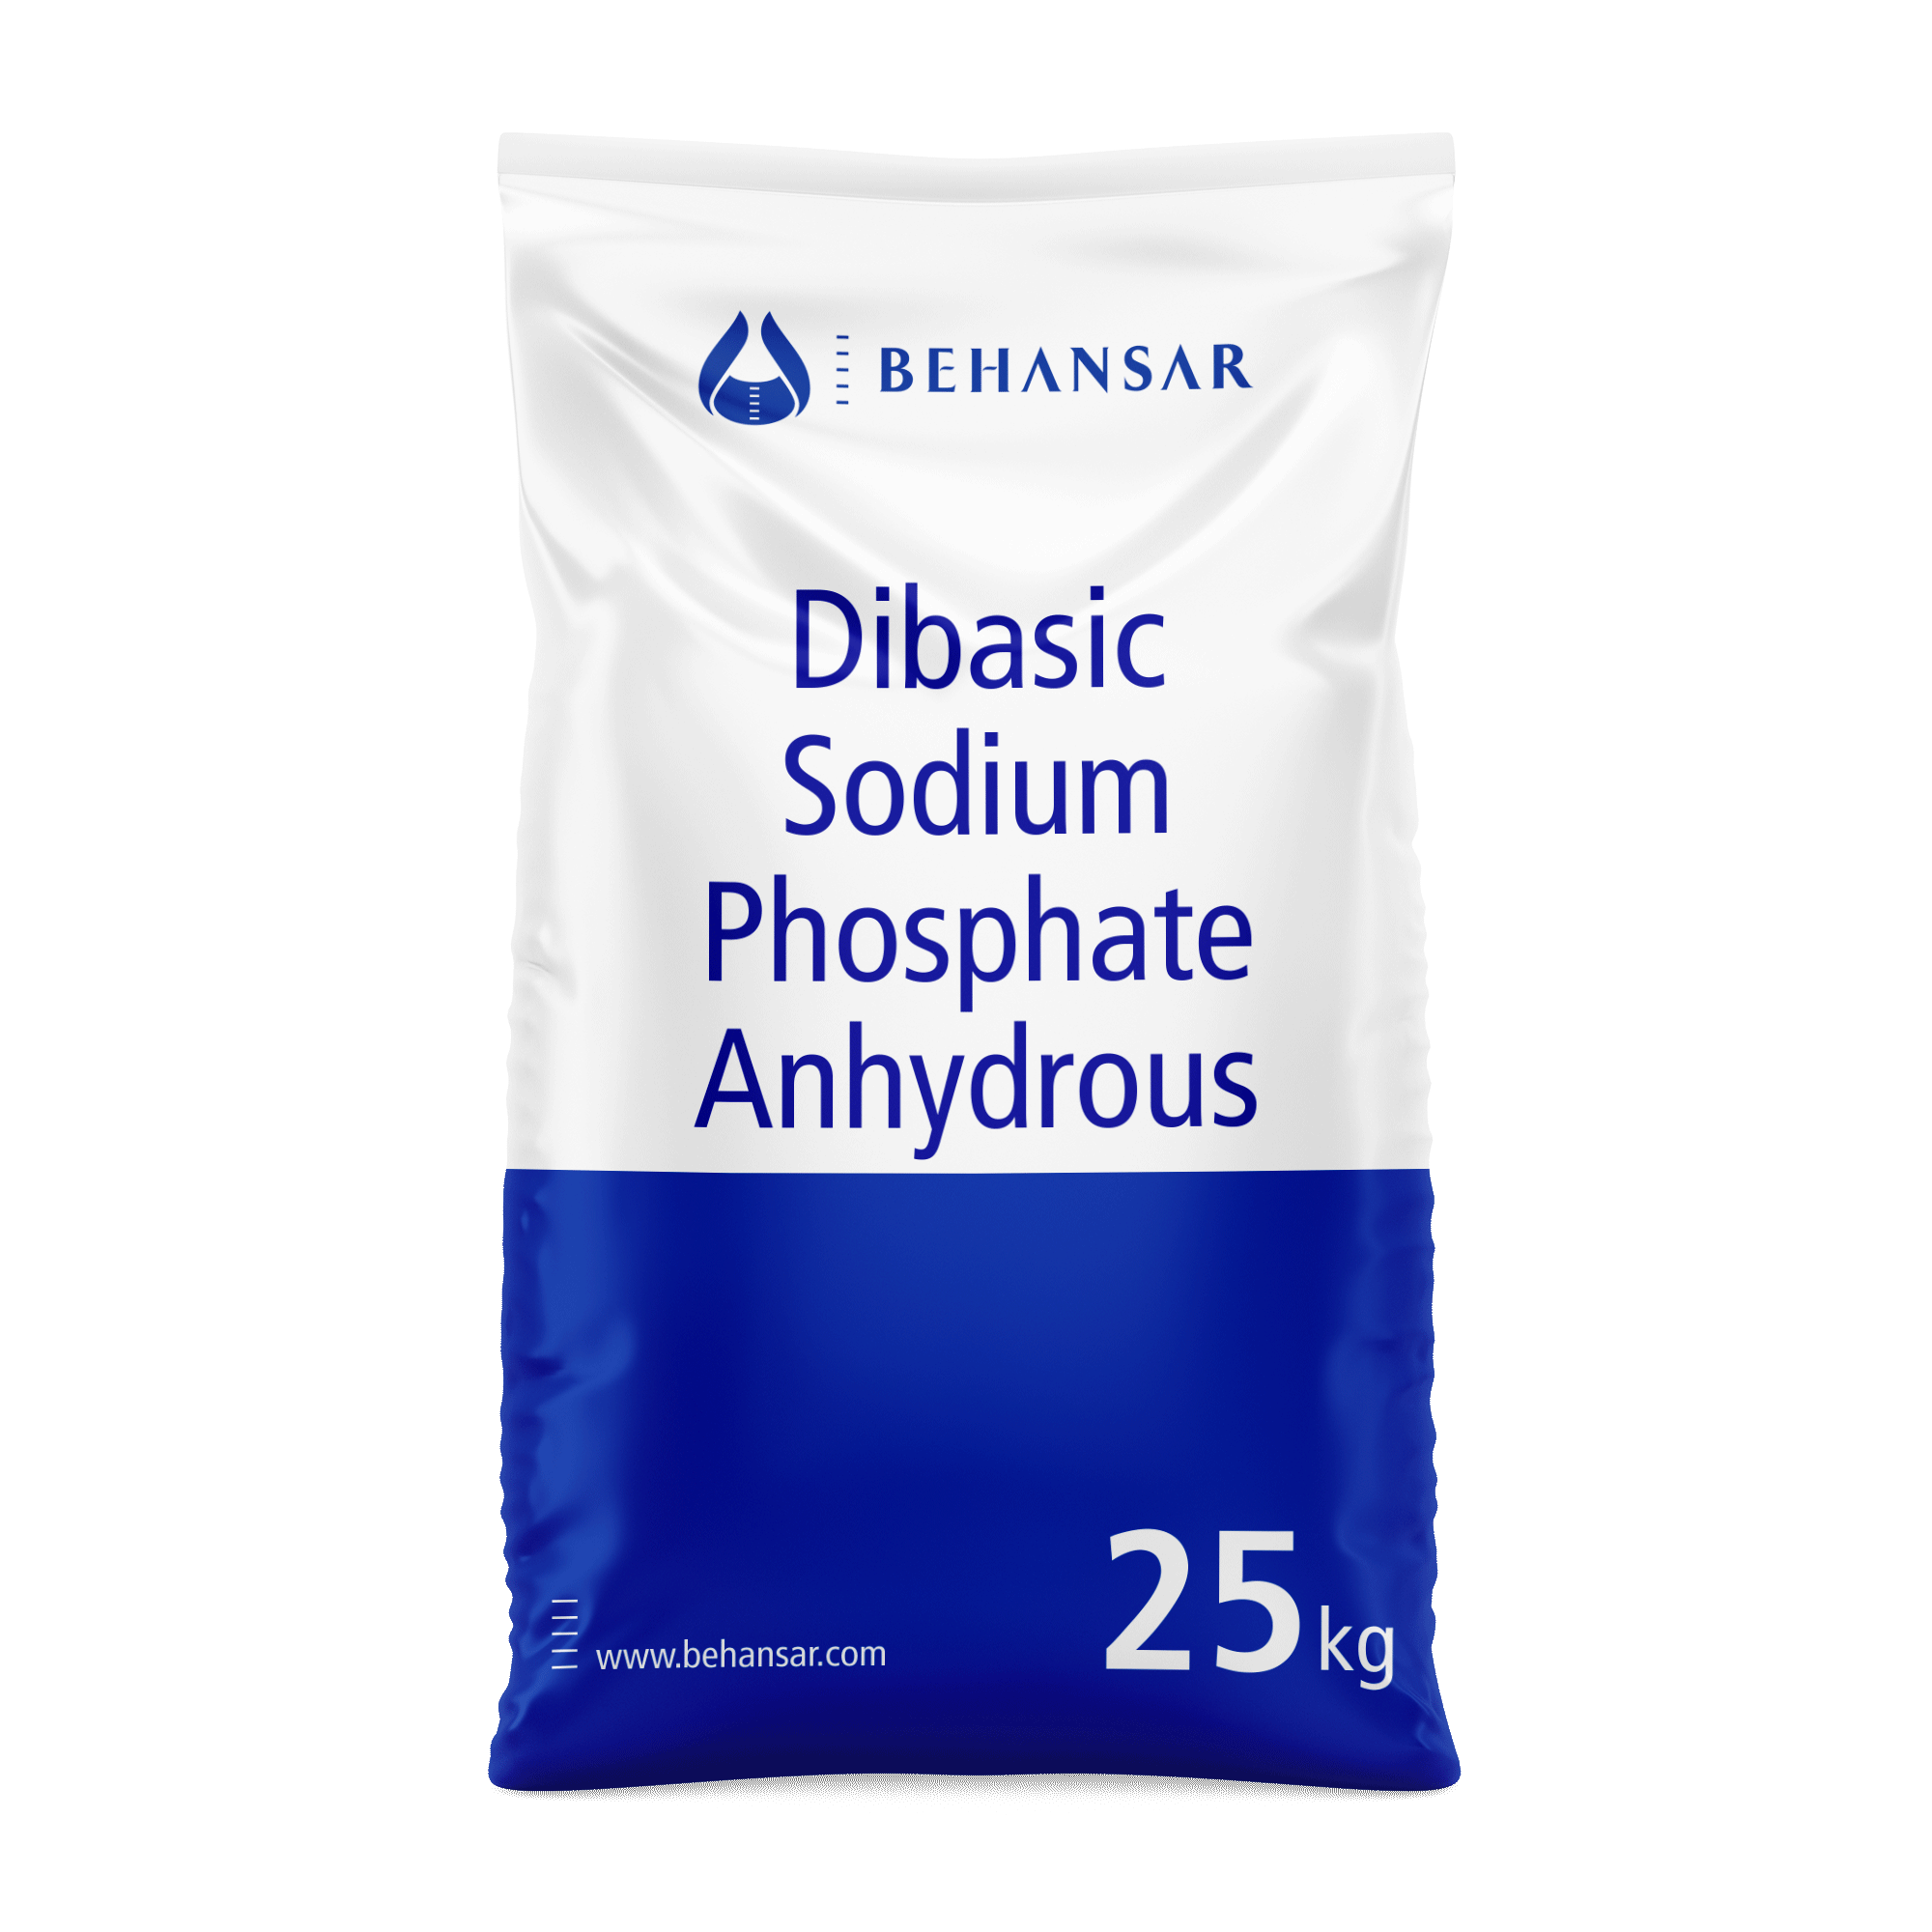 Dibasic Sodium Phosphate Anhydrous is one of the products of Behansar Co